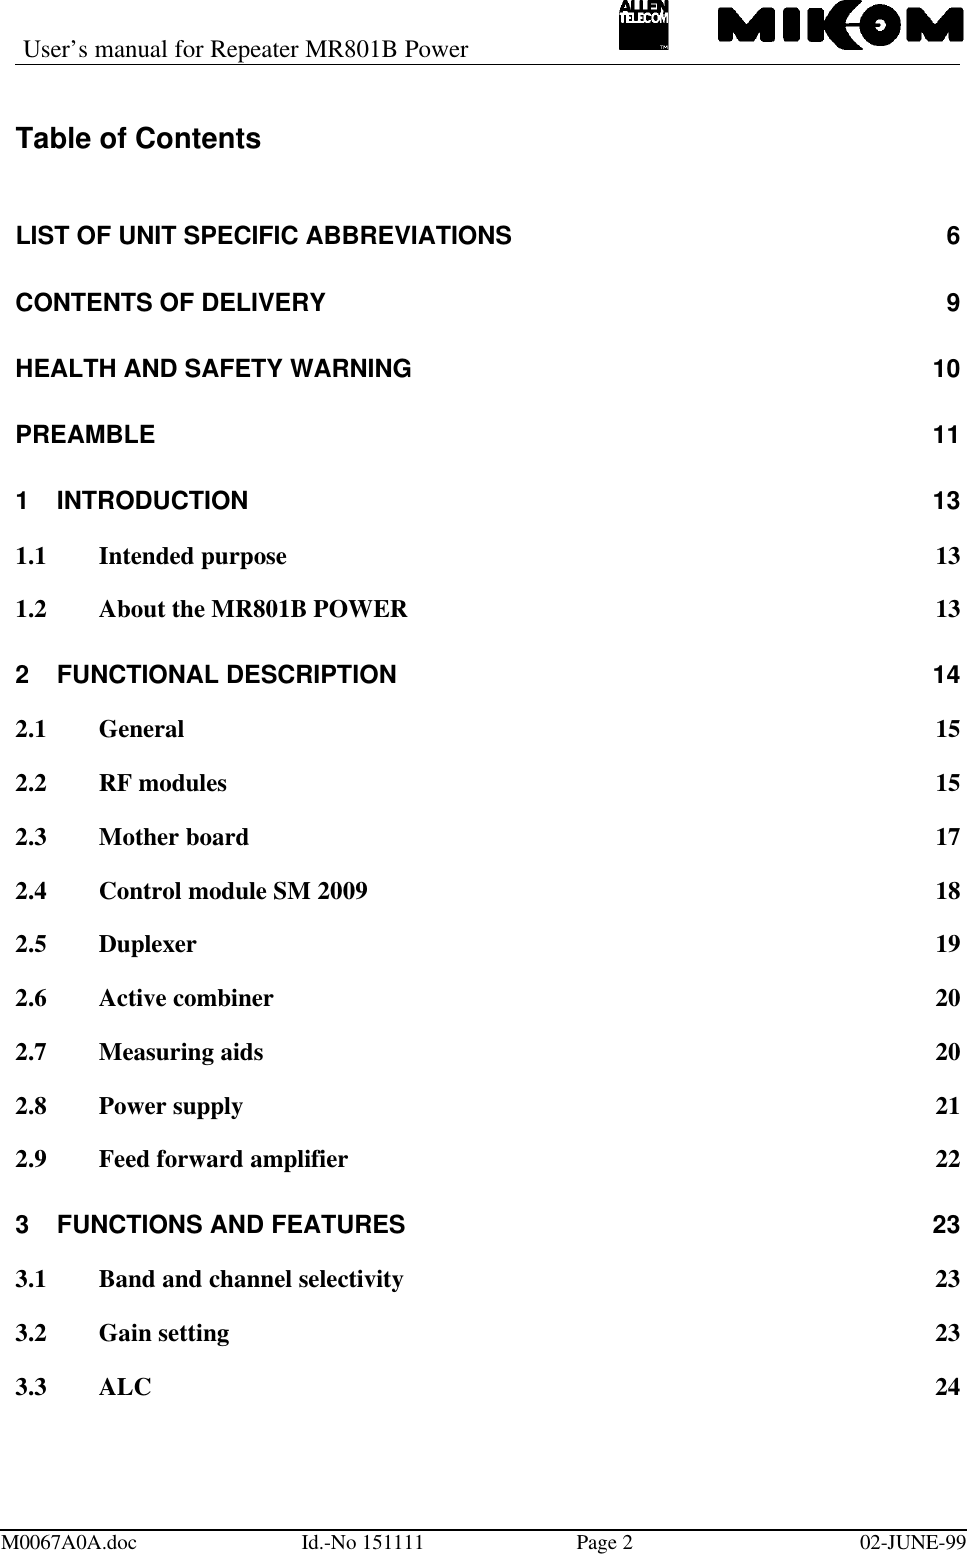 User’s manual for Repeater MR801B PowerM0067A0A.doc Id.-No 151111 Page 202-JUNE-99Table of ContentsLIST OF UNIT SPECIFIC ABBREVIATIONS 6CONTENTS OF DELIVERY 9HEALTH AND SAFETY WARNING  10PREAMBLE 111INTRODUCTION 131.1 Intended purpose 131.2 About the MR801B POWER 132FUNCTIONAL DESCRIPTION 142.1 General 152.2 RF modules 152.3 Mother board 172.4 Control module SM 2009 182.5 Duplexer 192.6 Active combiner 202.7 Measuring aids 202.8 Power supply 212.9 Feed forward amplifier 223FUNCTIONS AND FEATURES 233.1 Band and channel selectivity 233.2 Gain setting 233.3 ALC 24